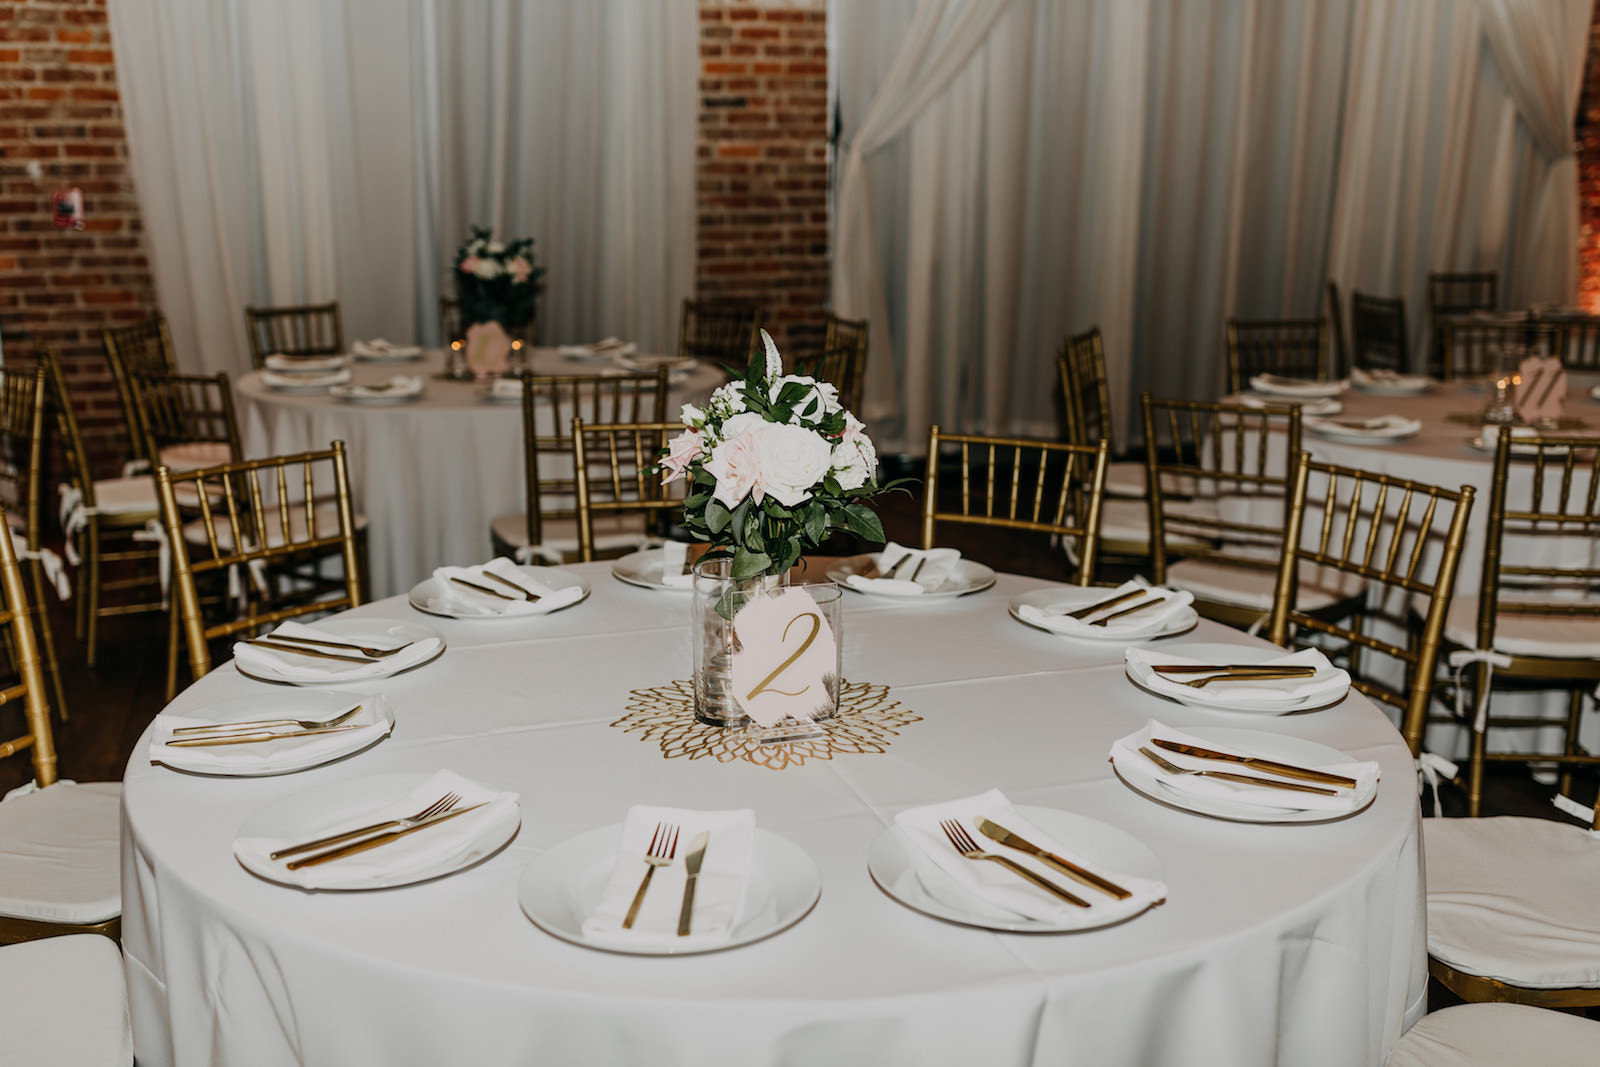 White Round Table Linens and Gold Flatware with Floral and Greenery Centerpieces | St. Petersburg Wedding Venue Nova 535